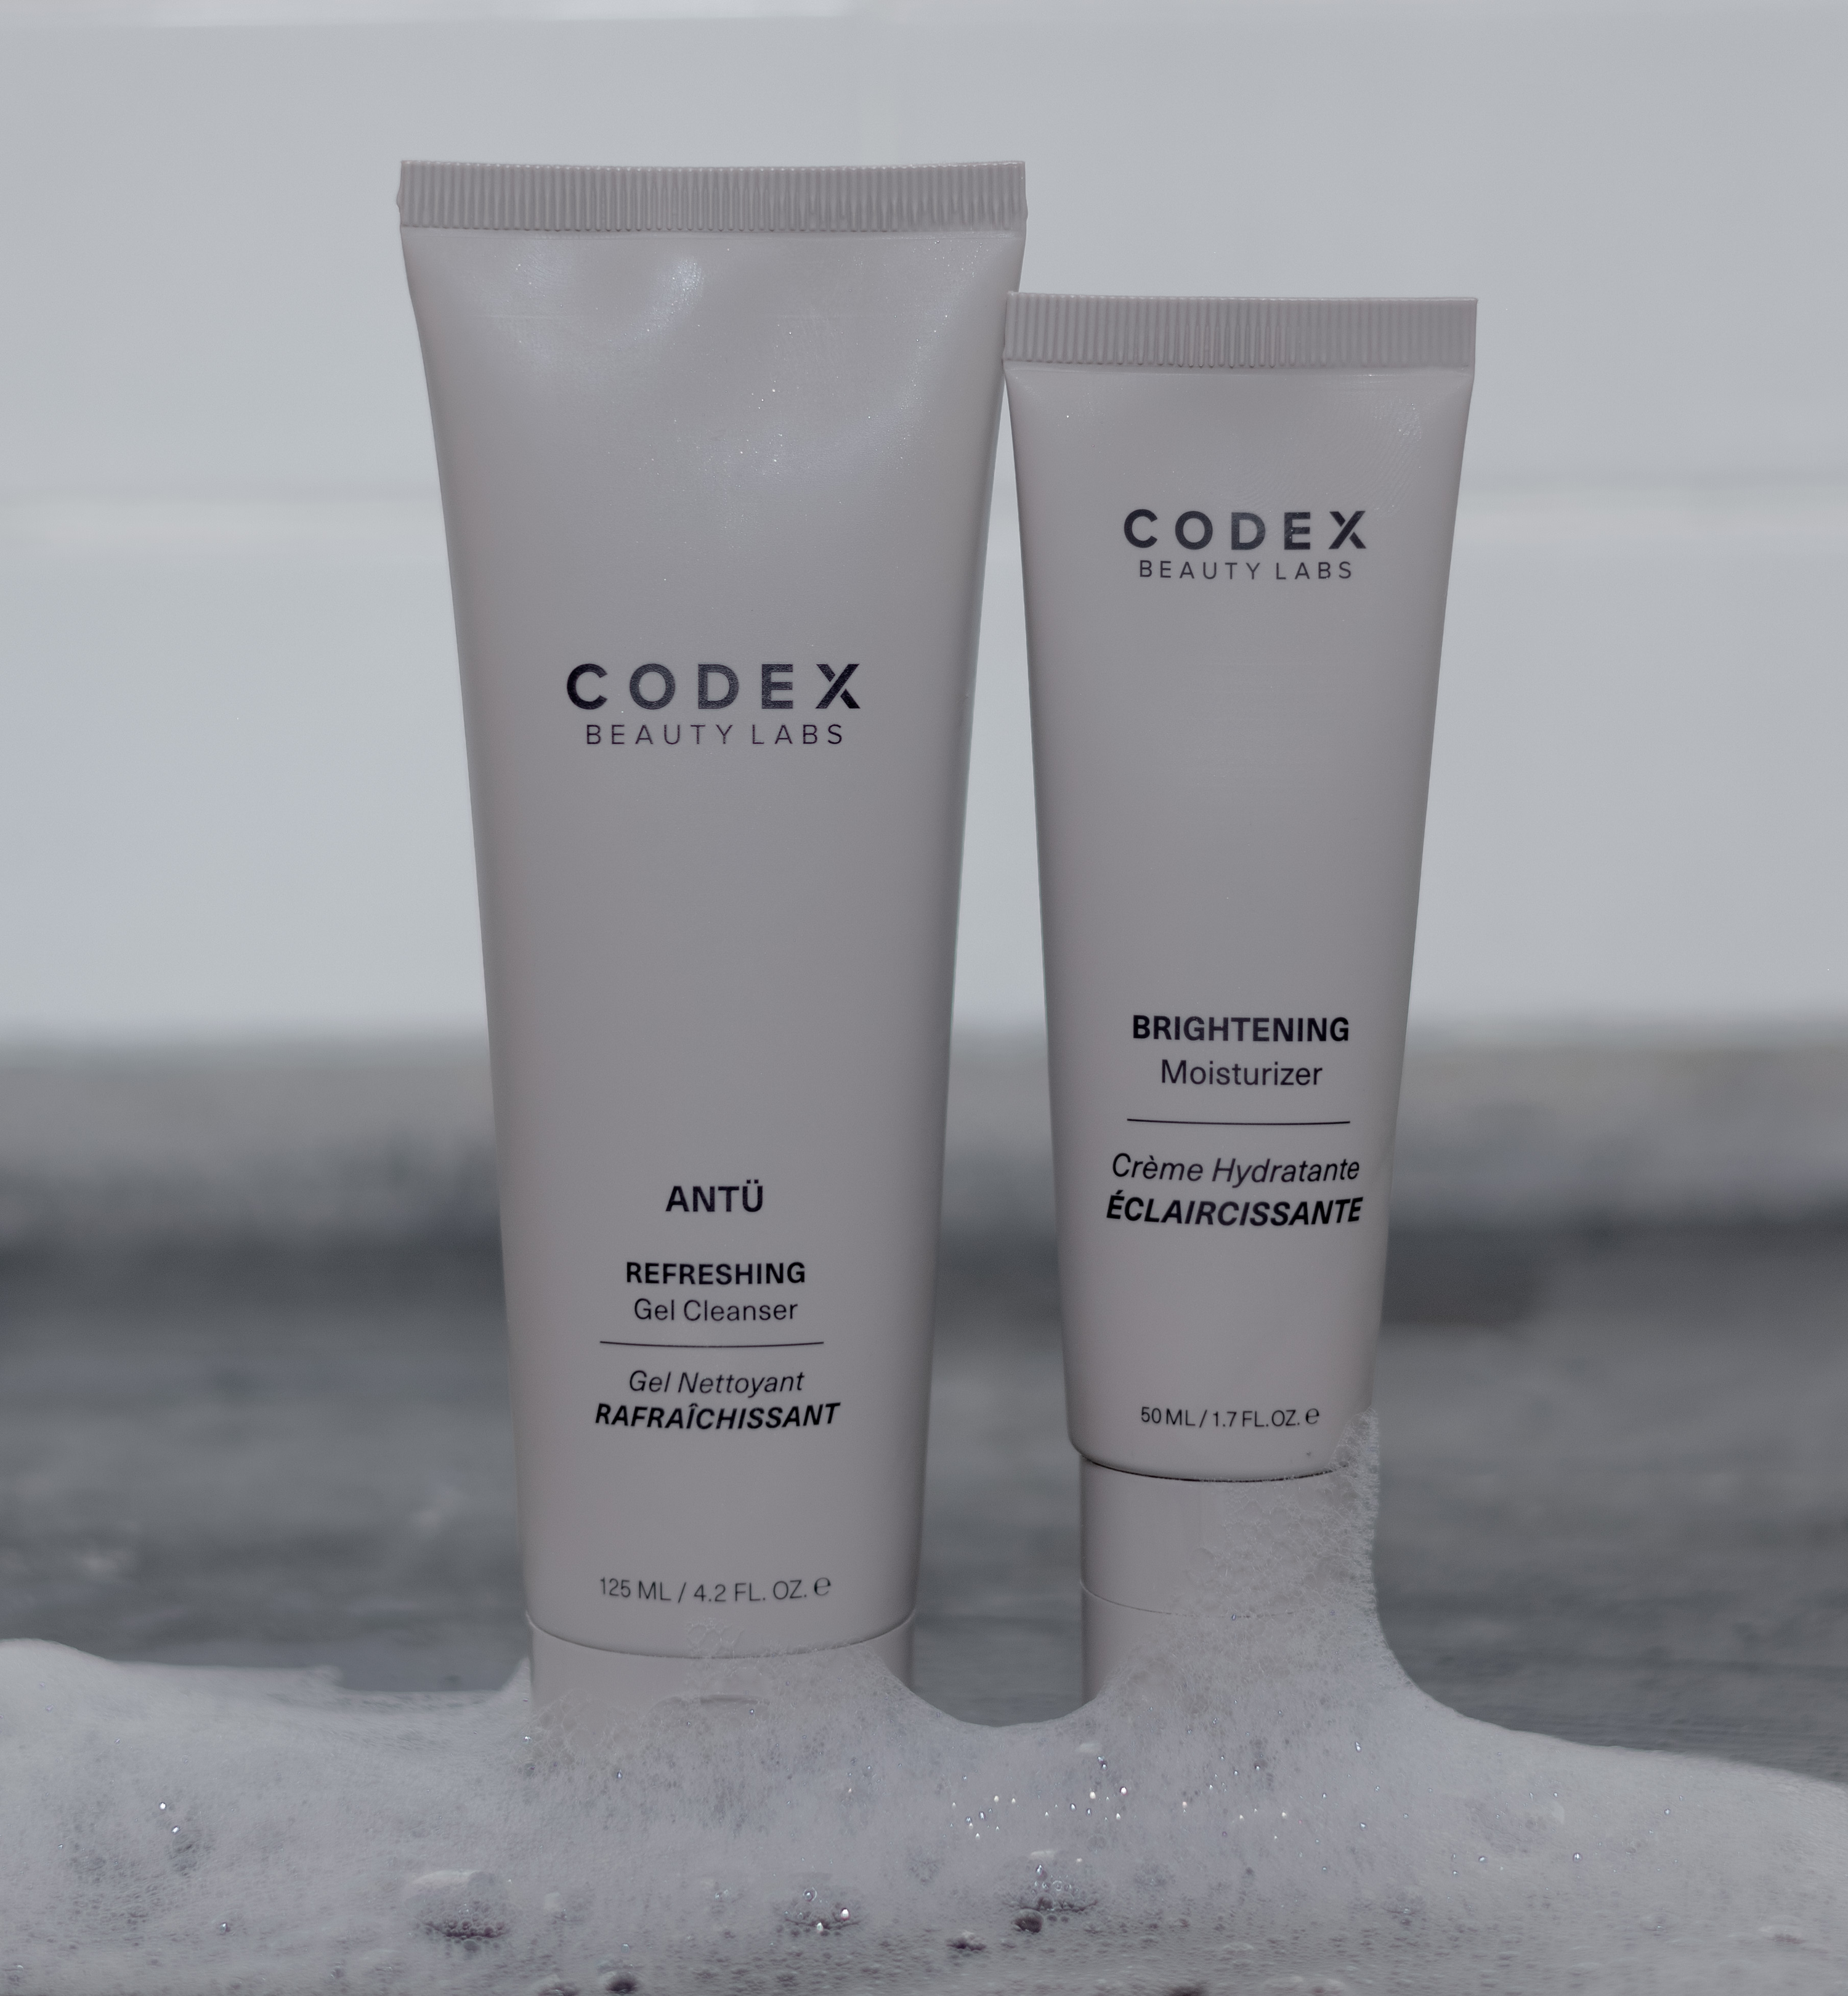 Codex Beauty Labs Antu Refreshing Gel Cleanser and Antu Brightening Moisturizer placed on the side in a bathroom